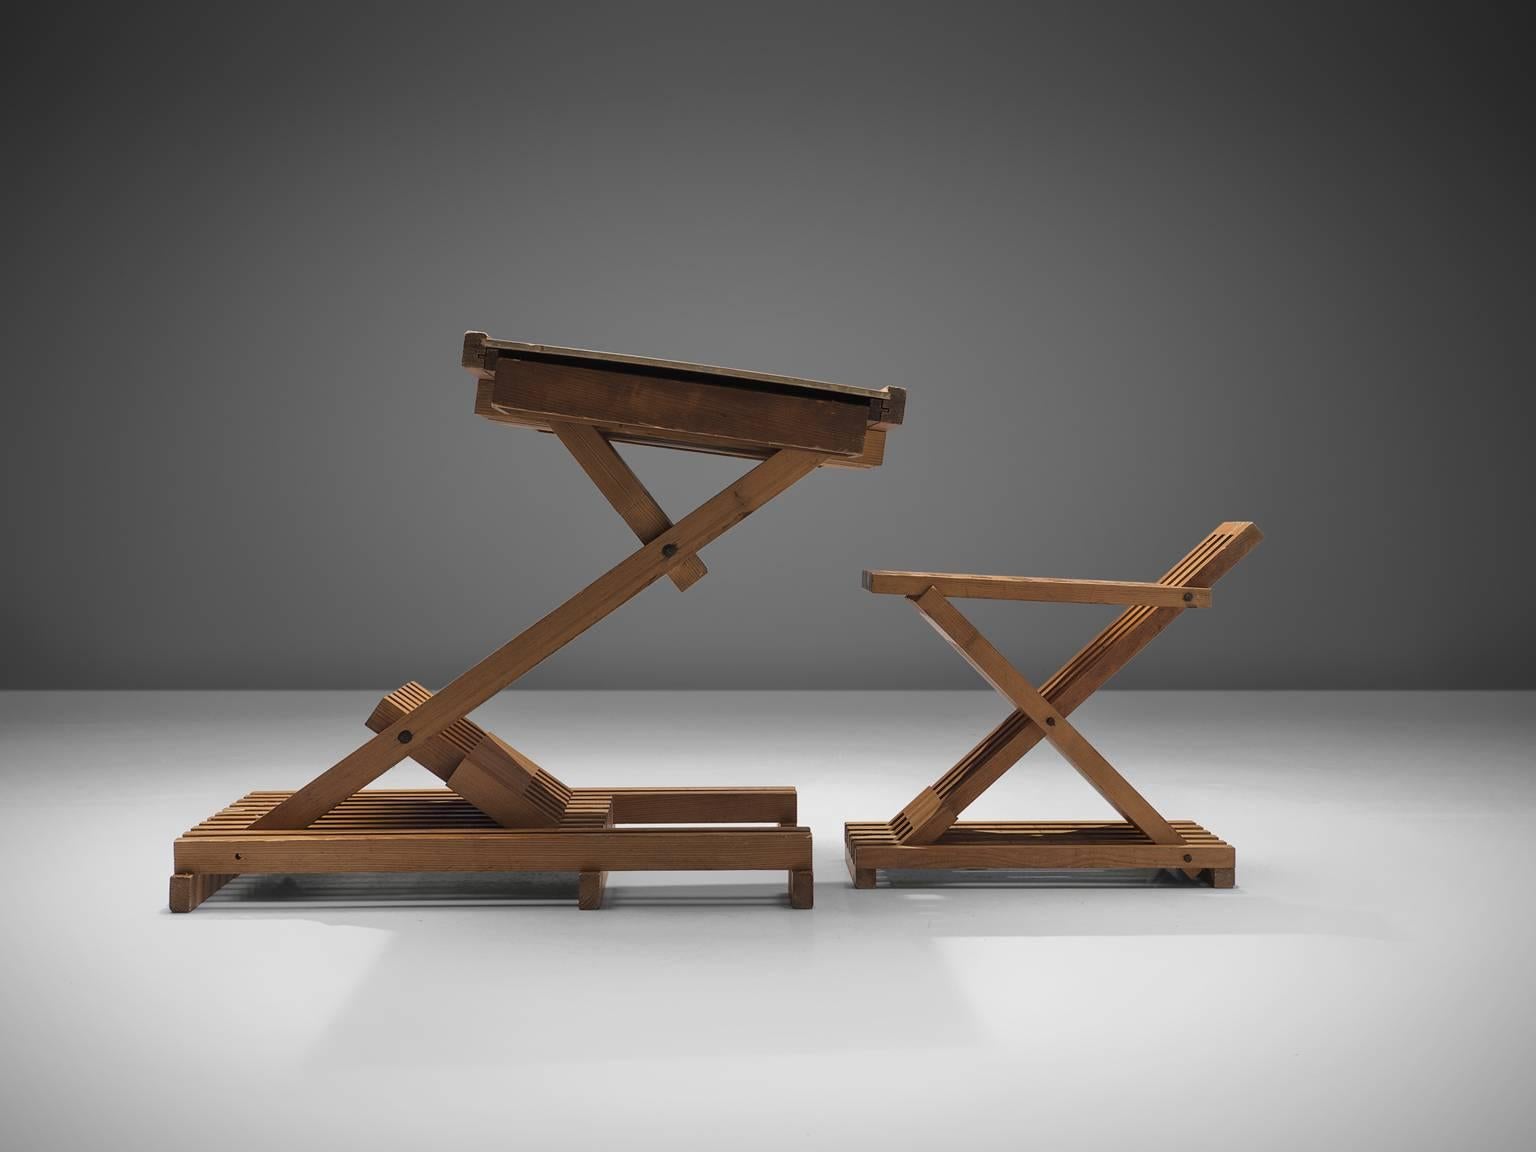 Designer drawing table, pine, France, 1960s. 

This geometric drawing is very architectural in its appearance. It is complex when perceived at first yet functional and simplistic in function. The piece is made of pine and solid in its